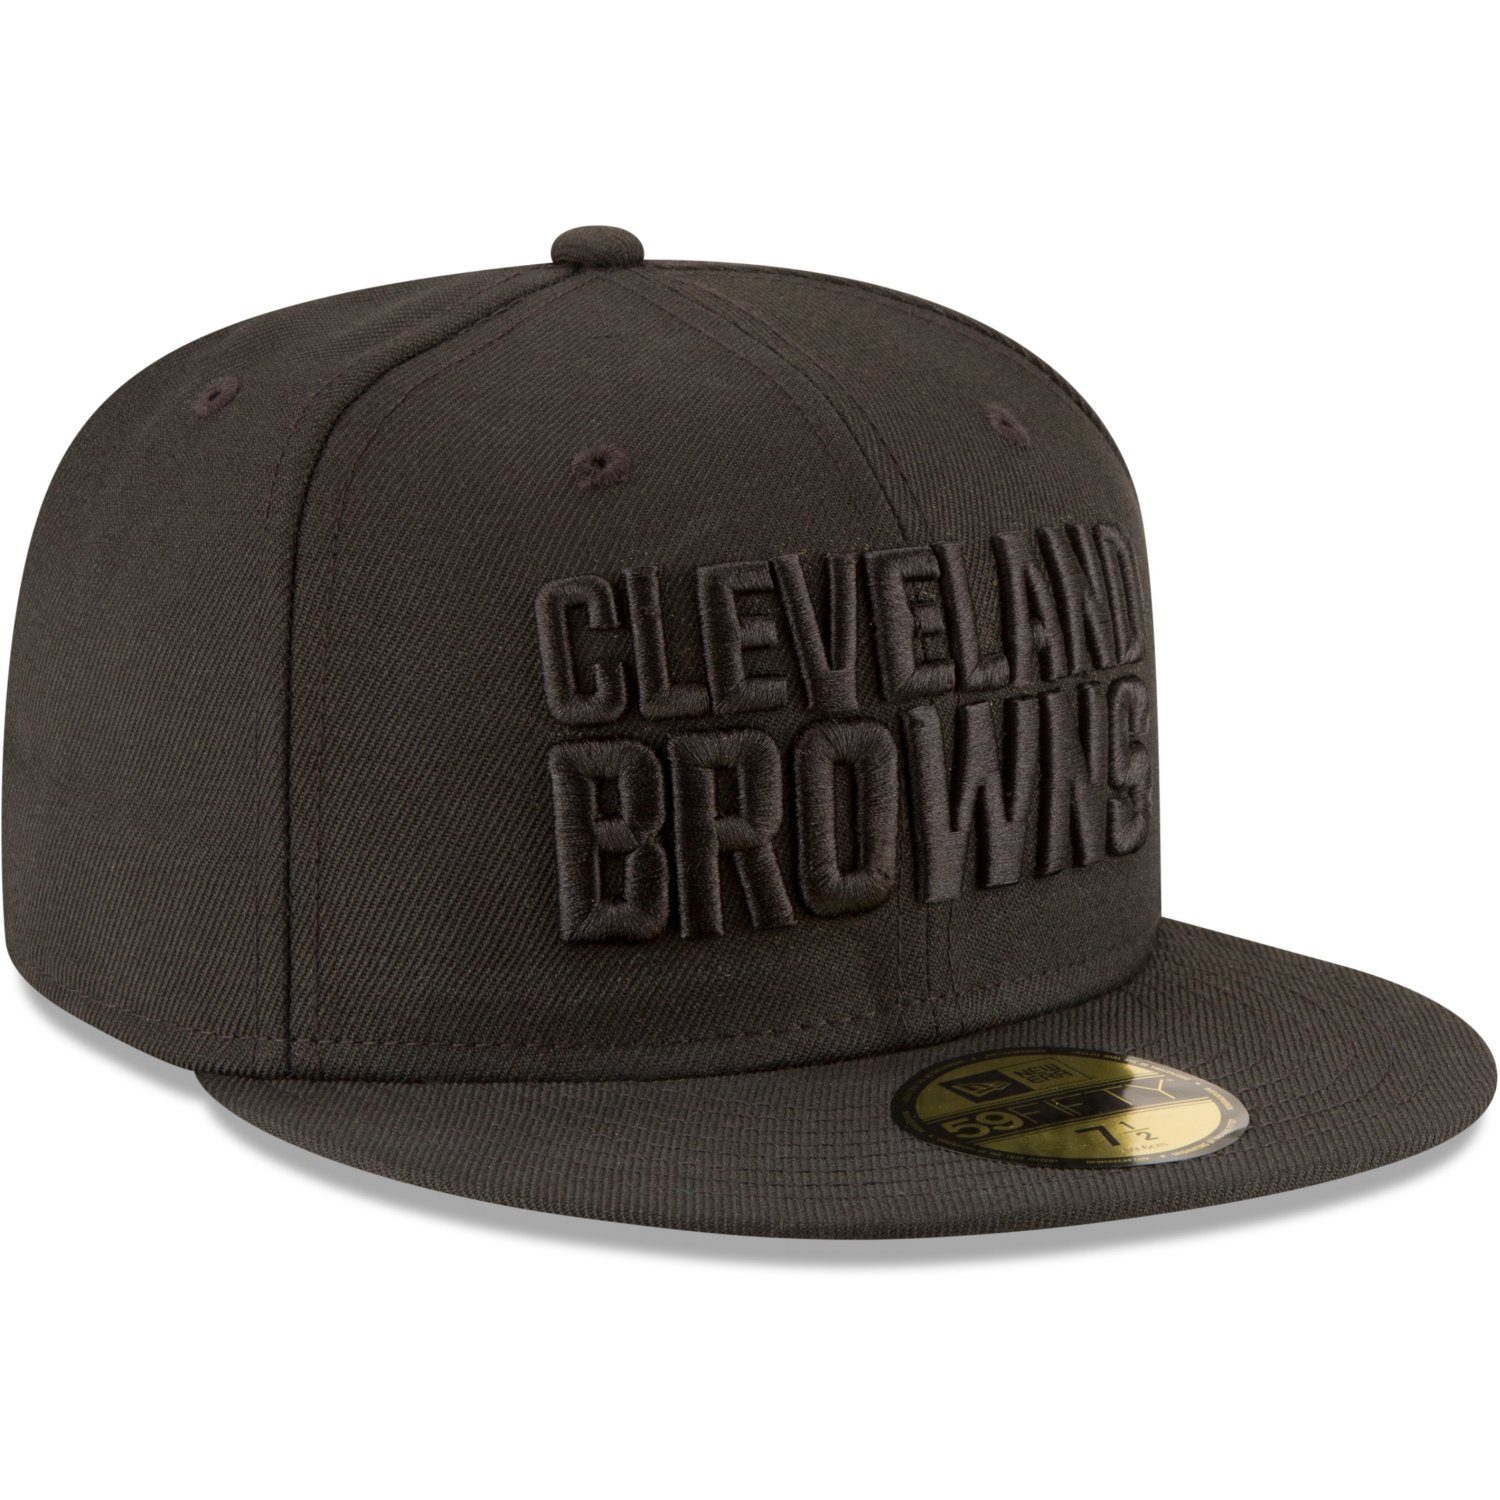 Cleveland Fitted Era Browns New Cap NFL 59Fifty